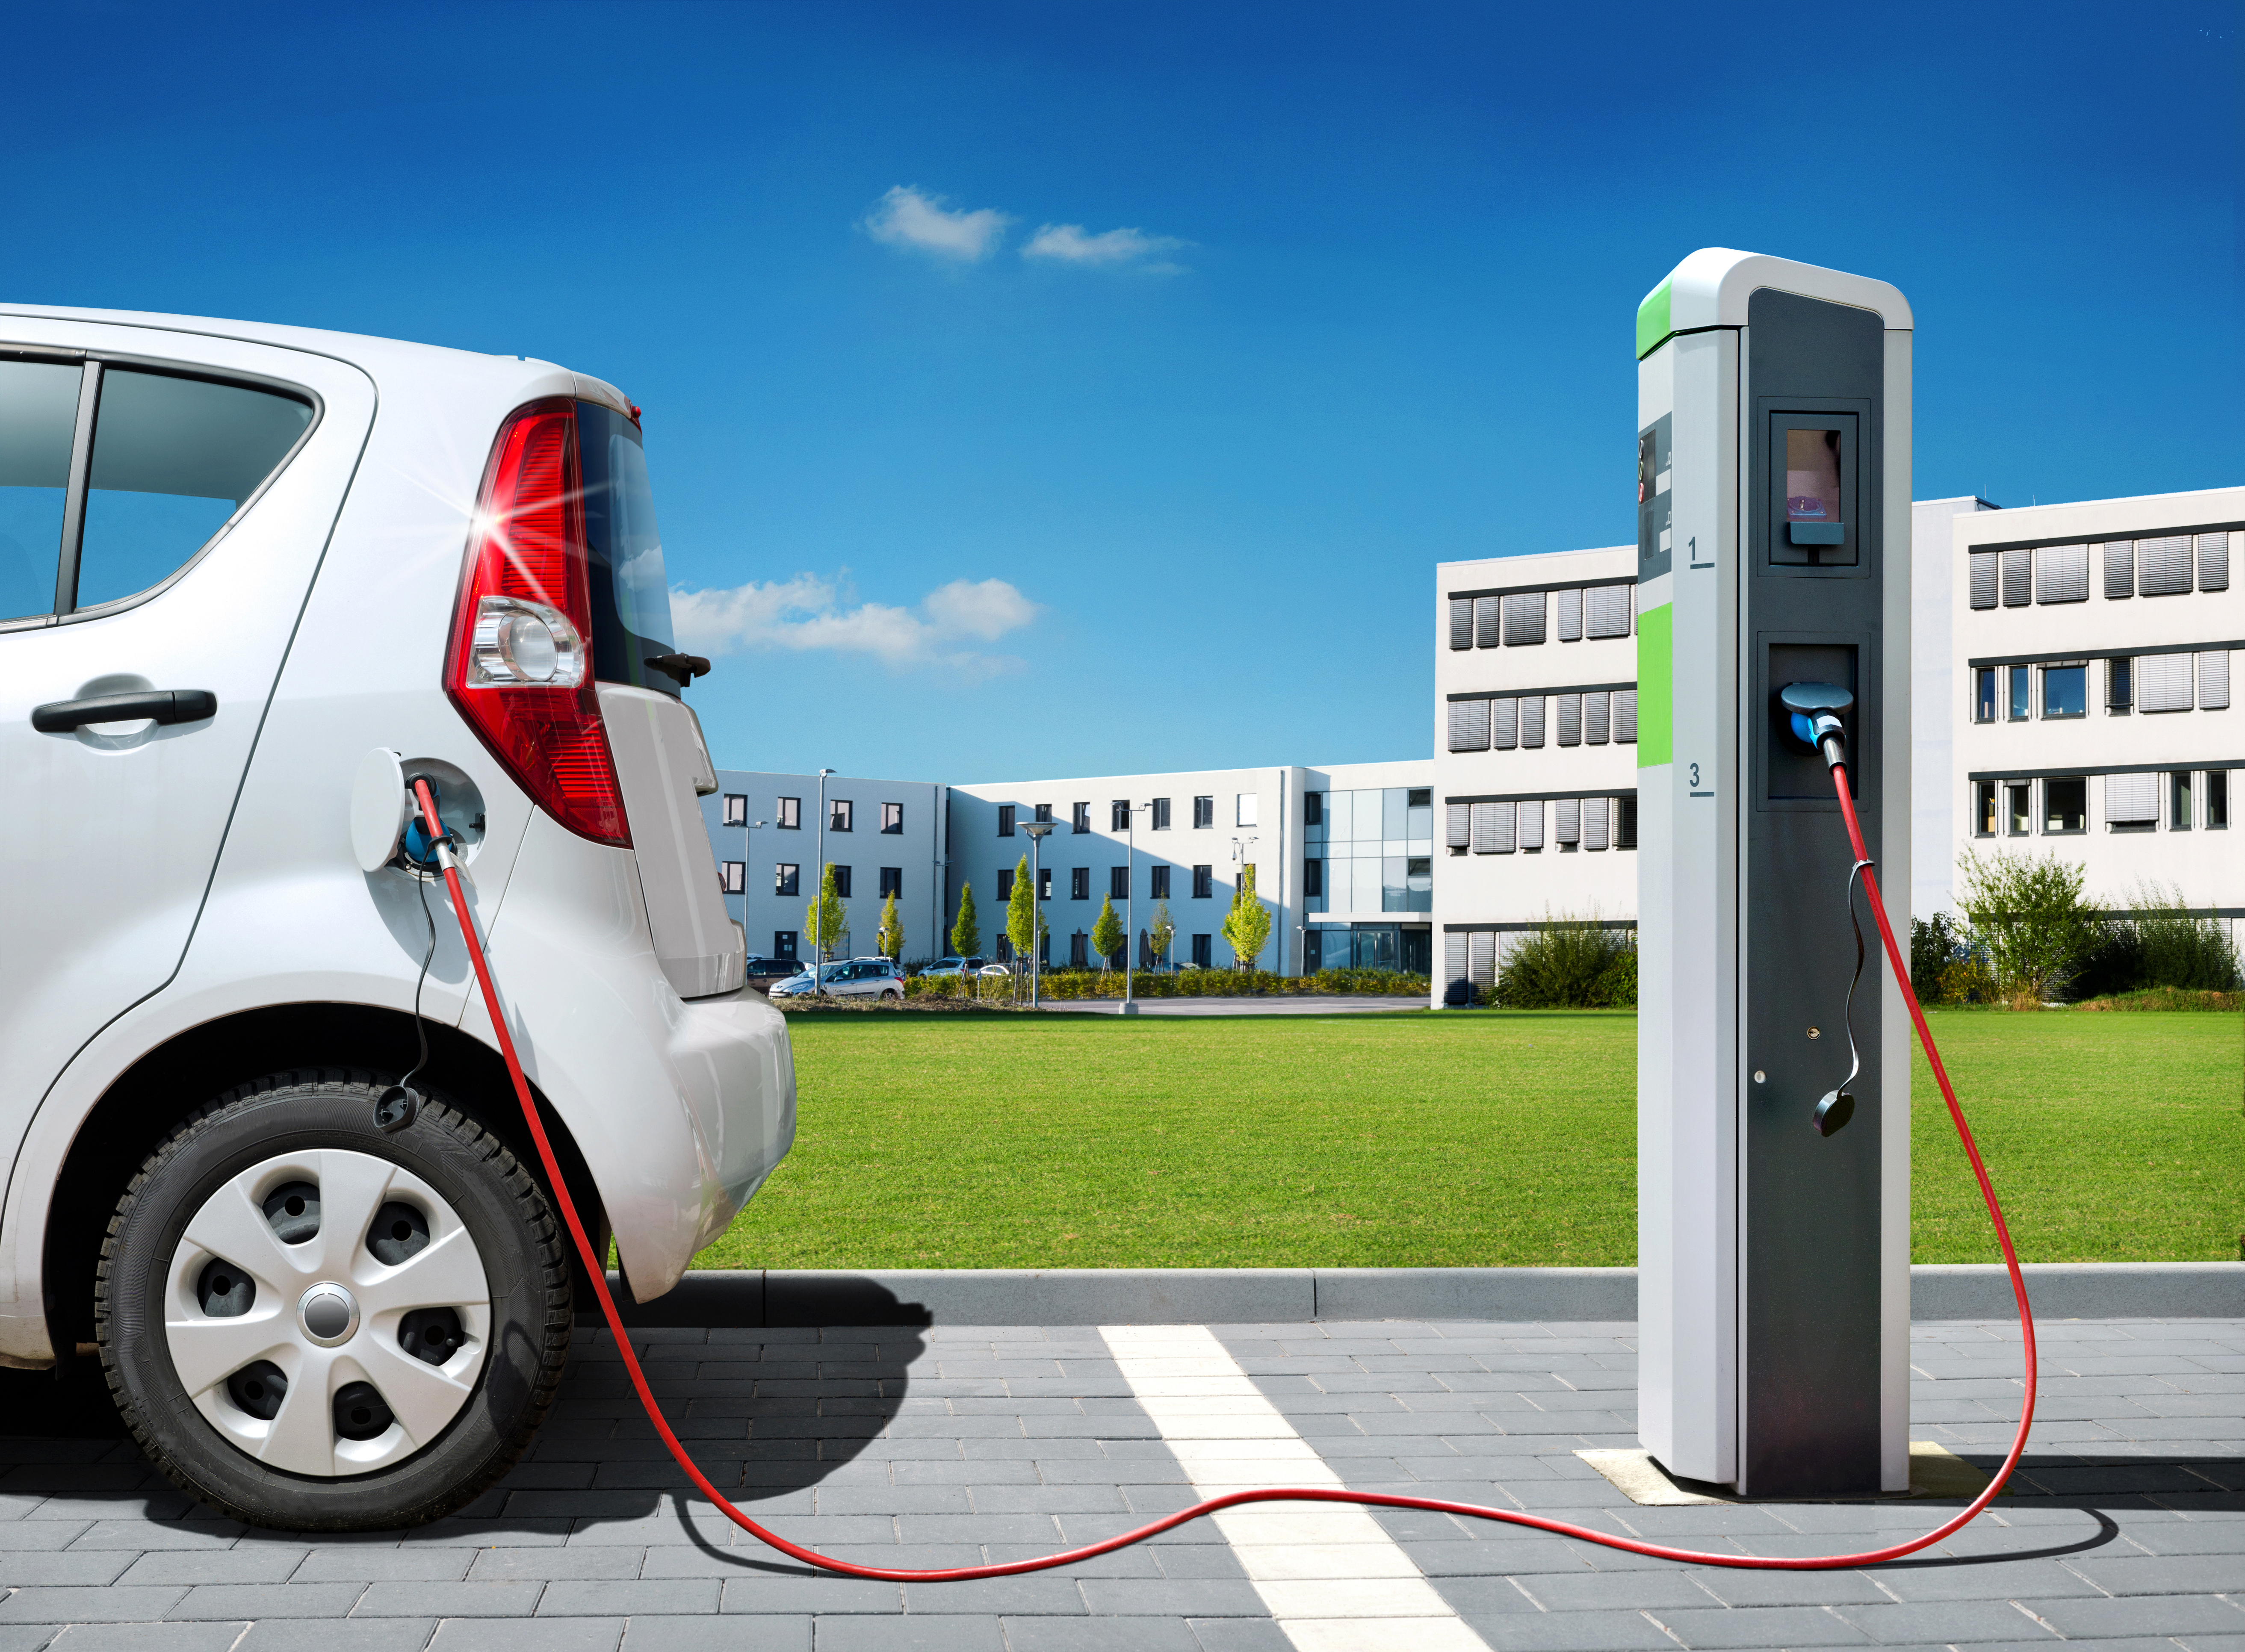 Crunching the Numbers on Electric Vehicle Adoption